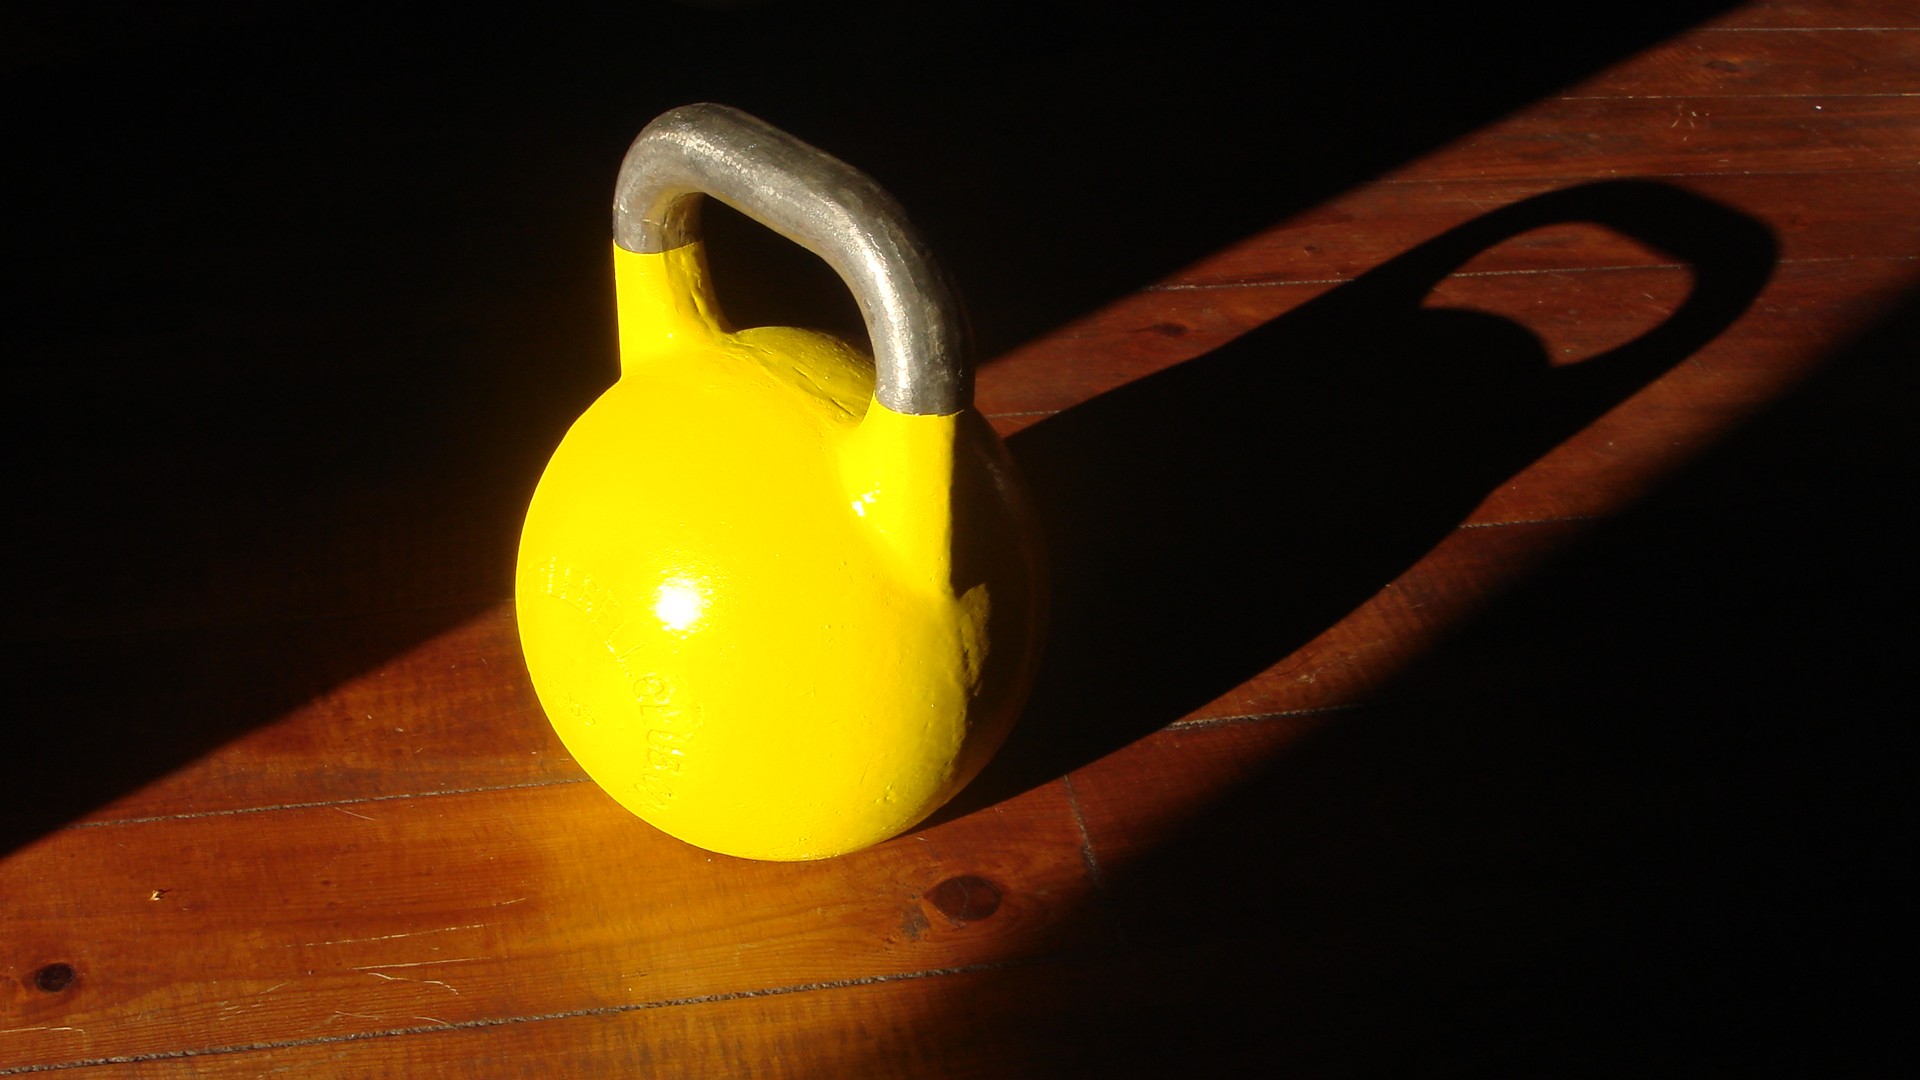 General 1920x1080 photography kettlebells indoors wooden surface